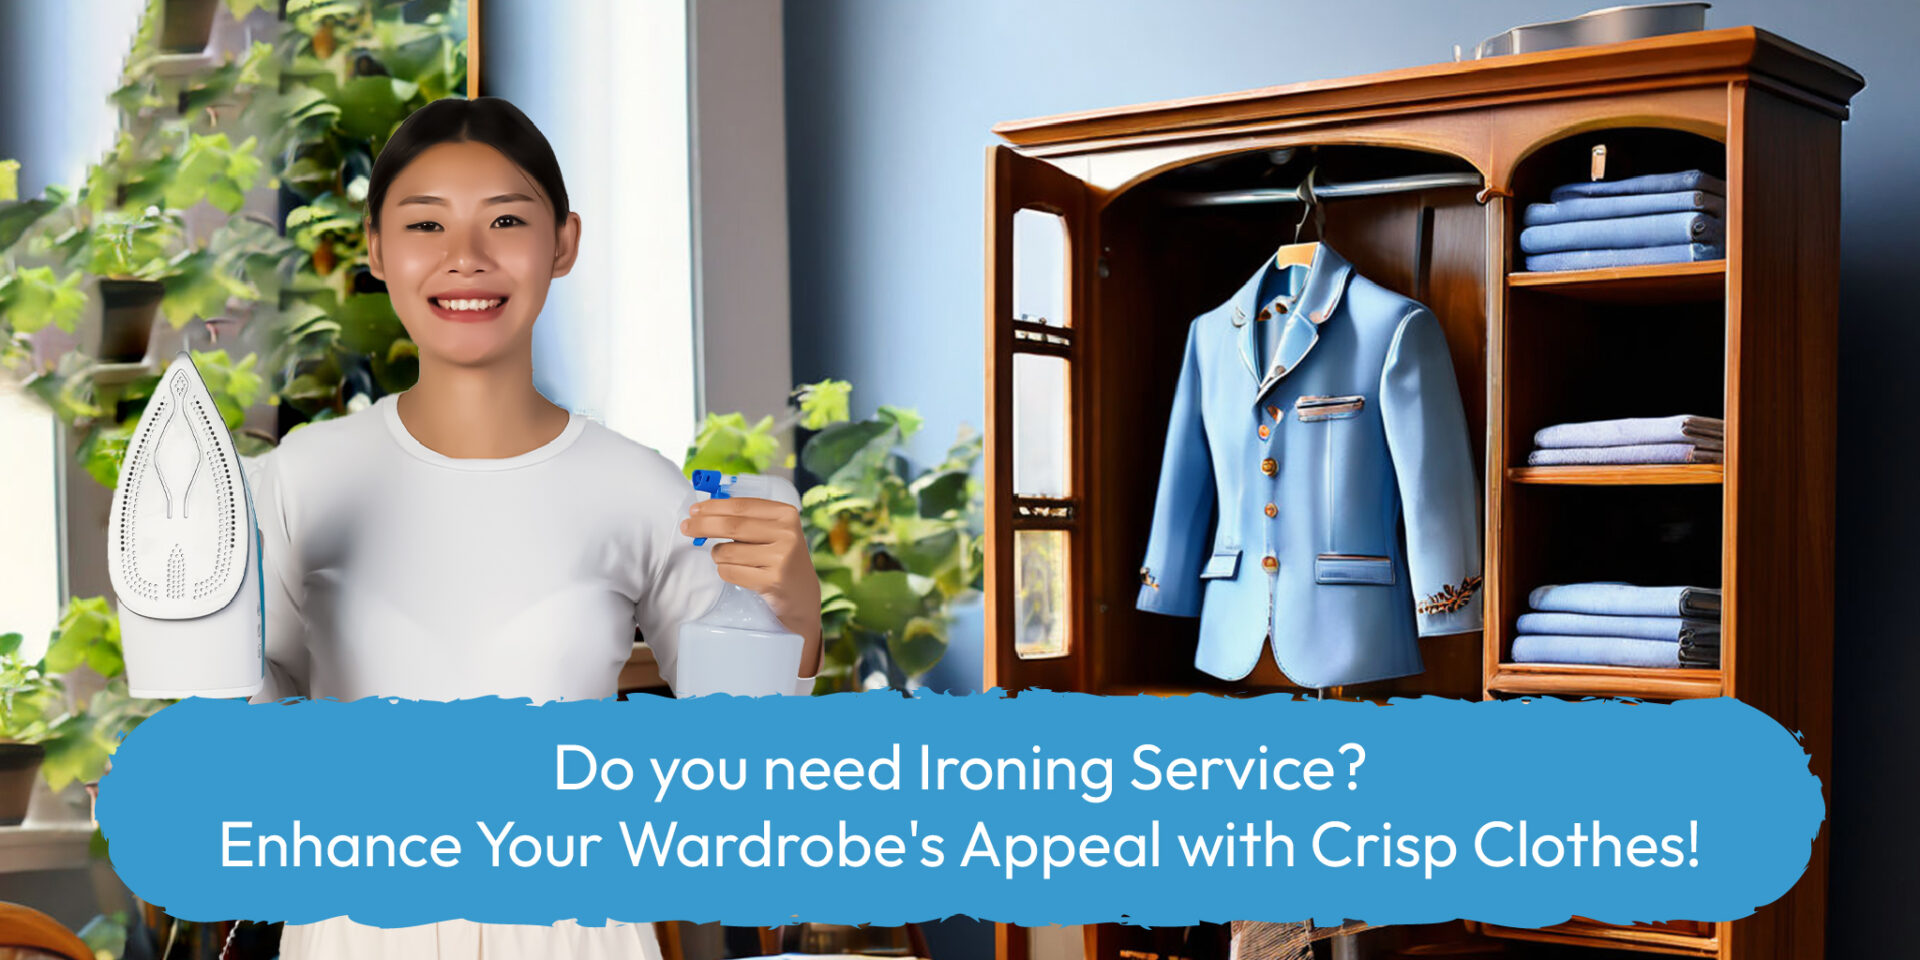 Do You need Ironing Services? Enhance your wardrobe’s appeal with crisp clothes